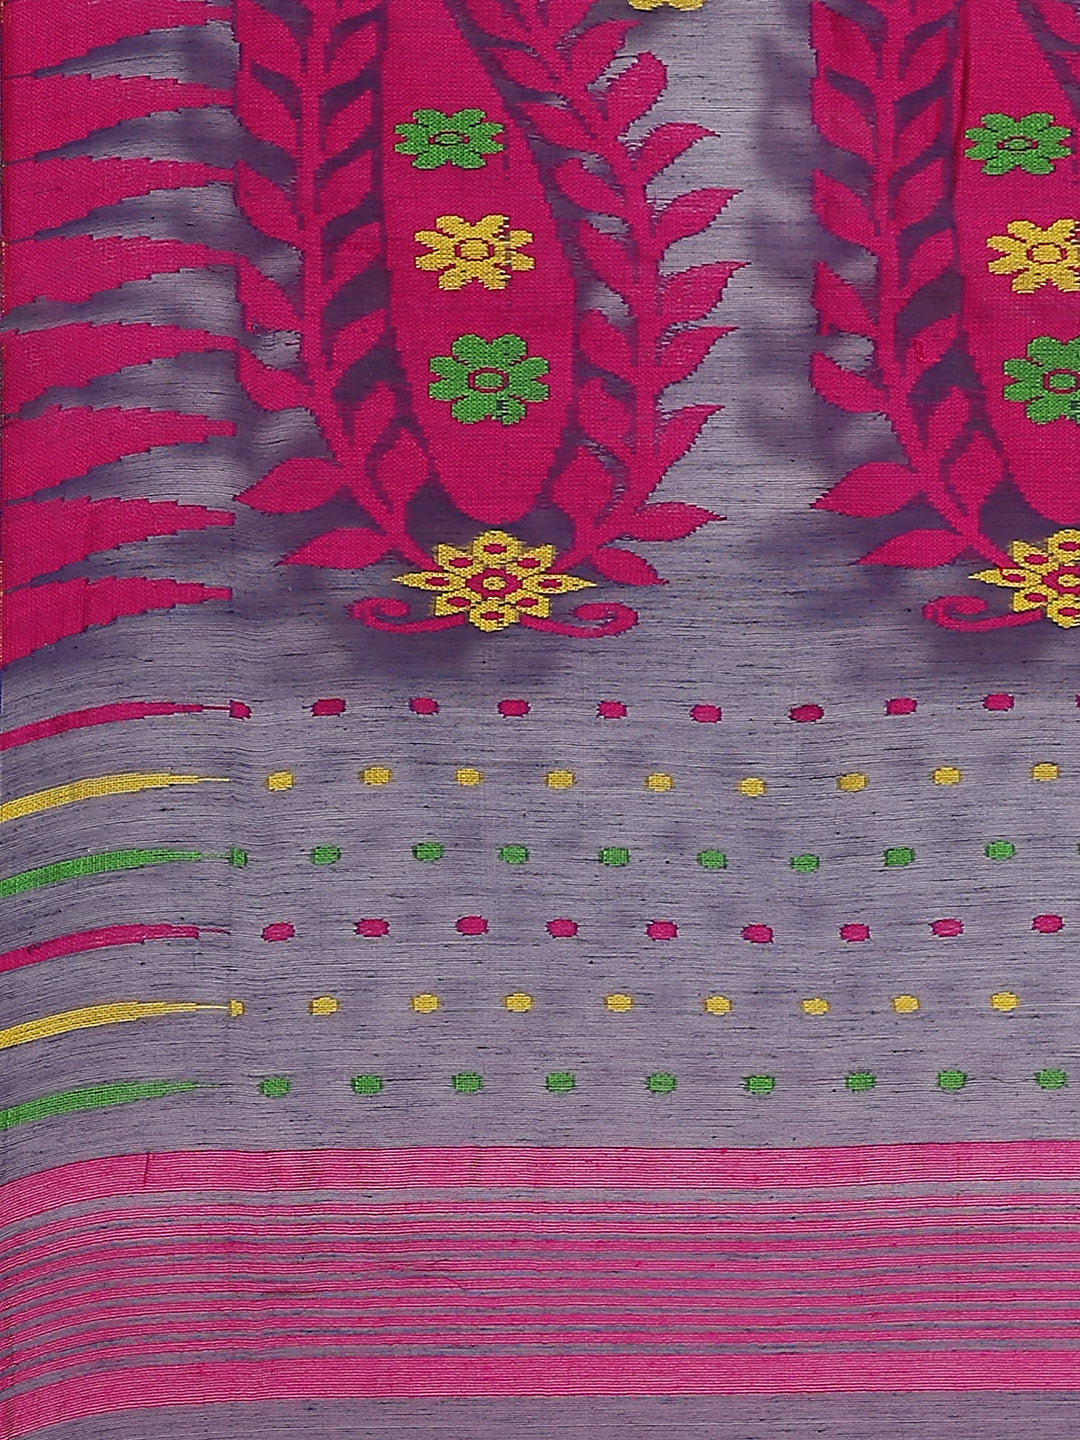 Blue and Pink, Kalakari India Jamdani Silk Cotton Woven Design Saree without blouse CHBHSA0028-Saree-Kalakari India-CHBHSA0028-Bengal, Geographical Indication, Hand Crafted, Hand Painted, Heritage Prints, Jamdani, Natural Dyes, Red, Sarees, Silk Blended, Sustainable Fabrics, Woven, Yellow-[Linen,Ethnic,wear,Fashionista,Handloom,Handicraft,Indigo,blockprint,block,print,Cotton,Chanderi,Blue, latest,classy,party,bollywood,trendy,summer,style,traditional,formal,elegant,unique,style,hand,block,print,